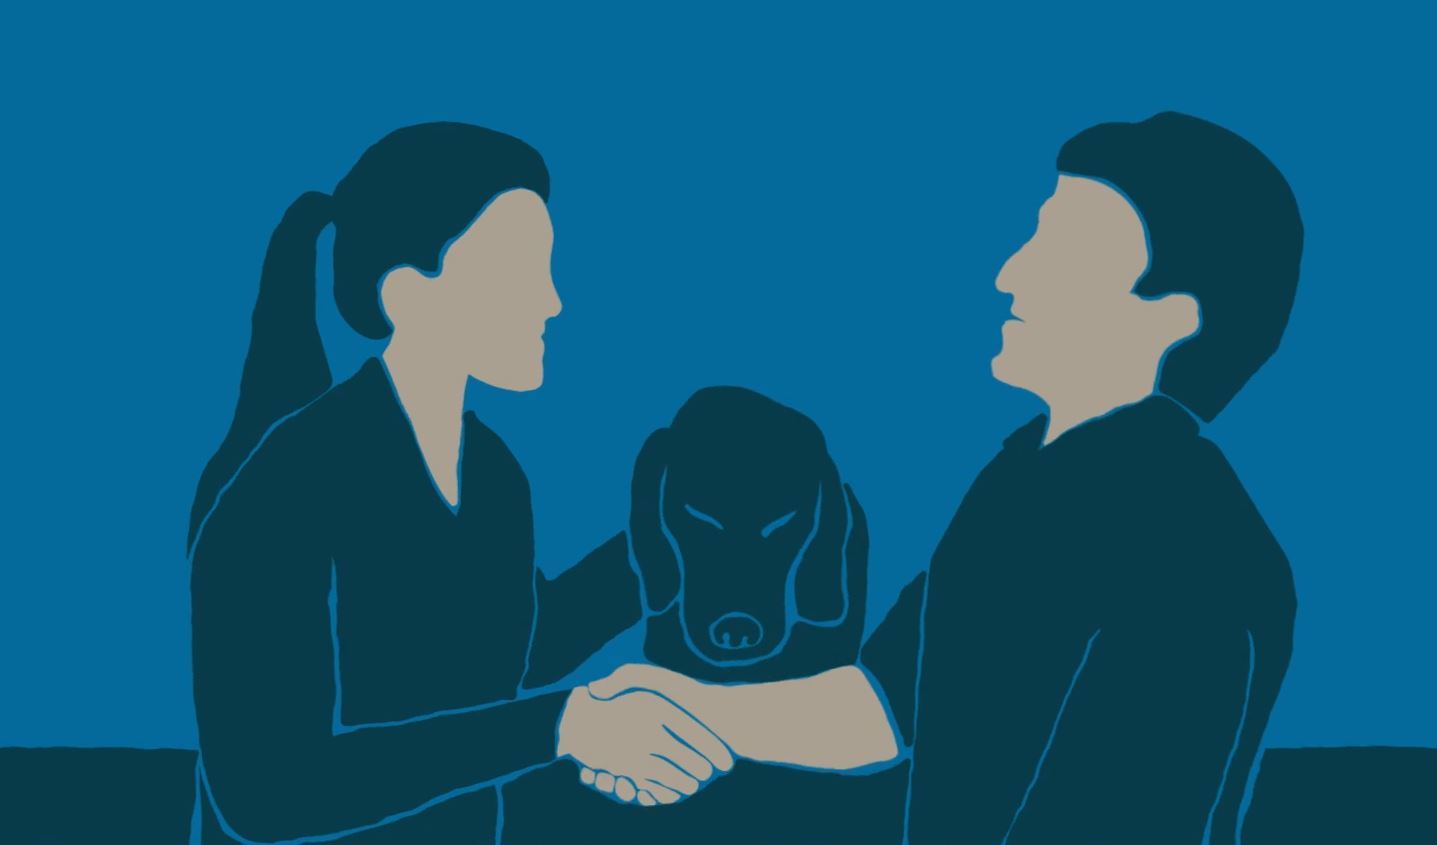 a graphic illustration of two veterinarians shaking hands with a dog between them.